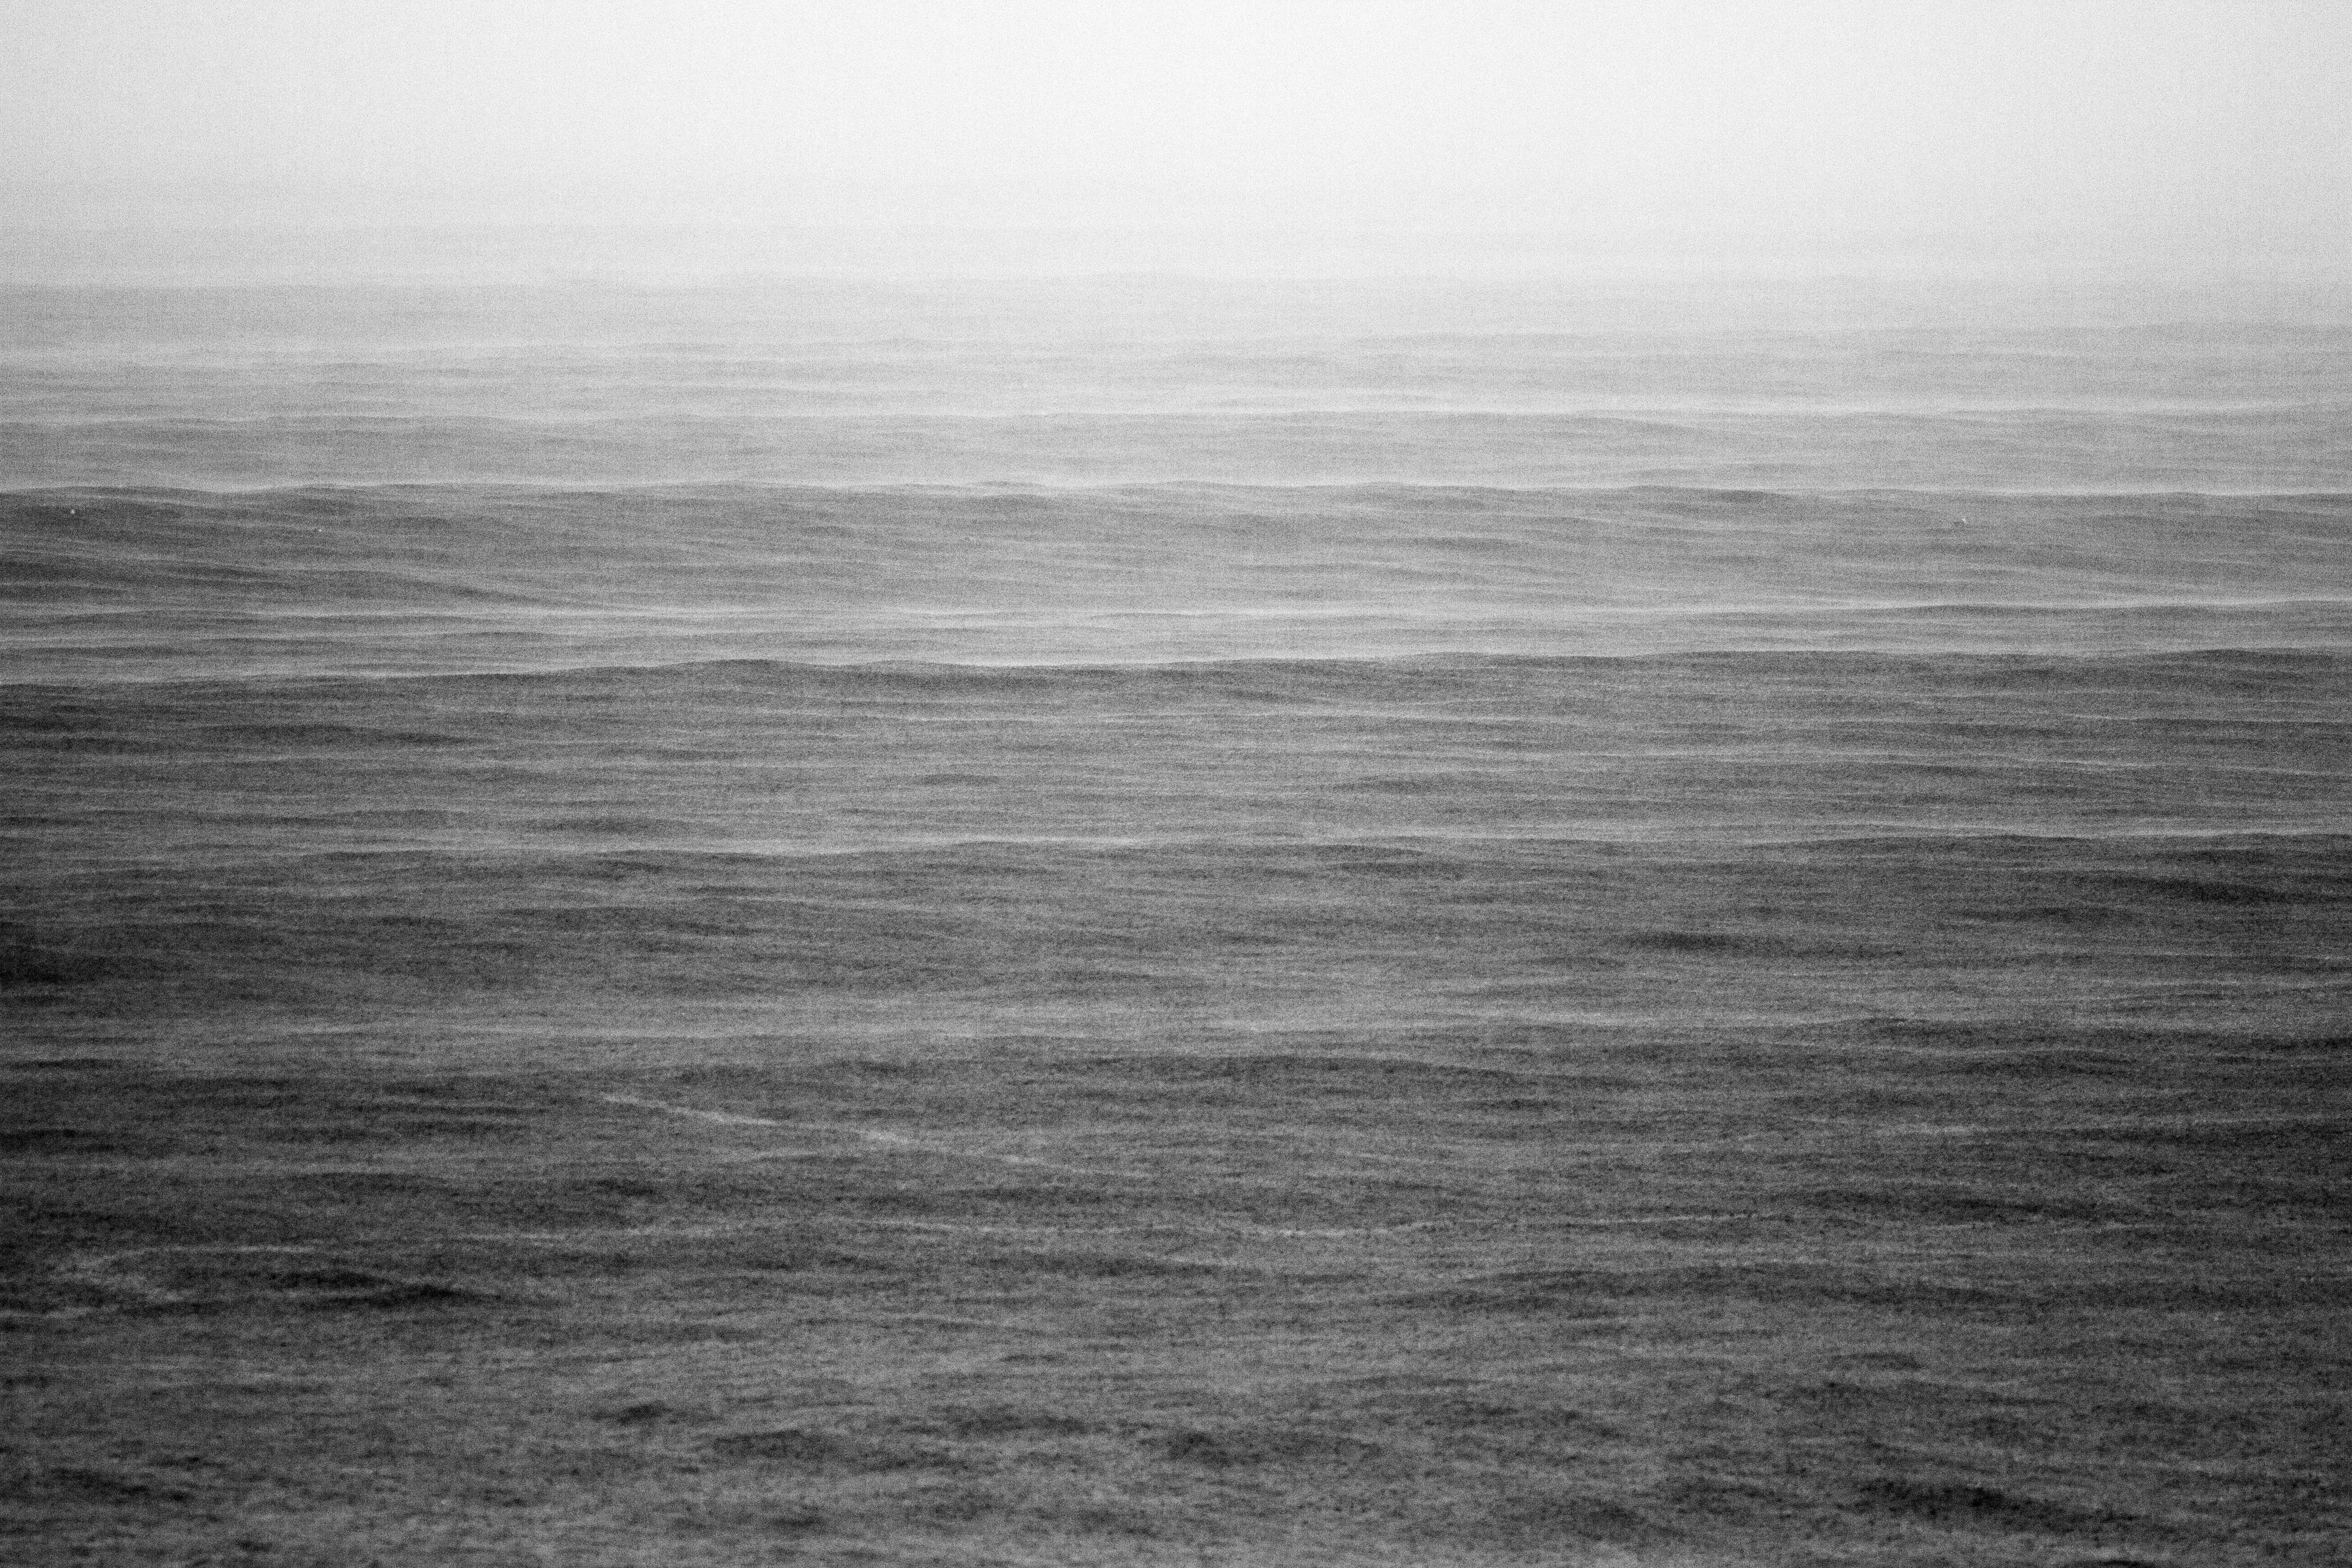 General 5184x3456 nature water monochrome sea waves noise gray